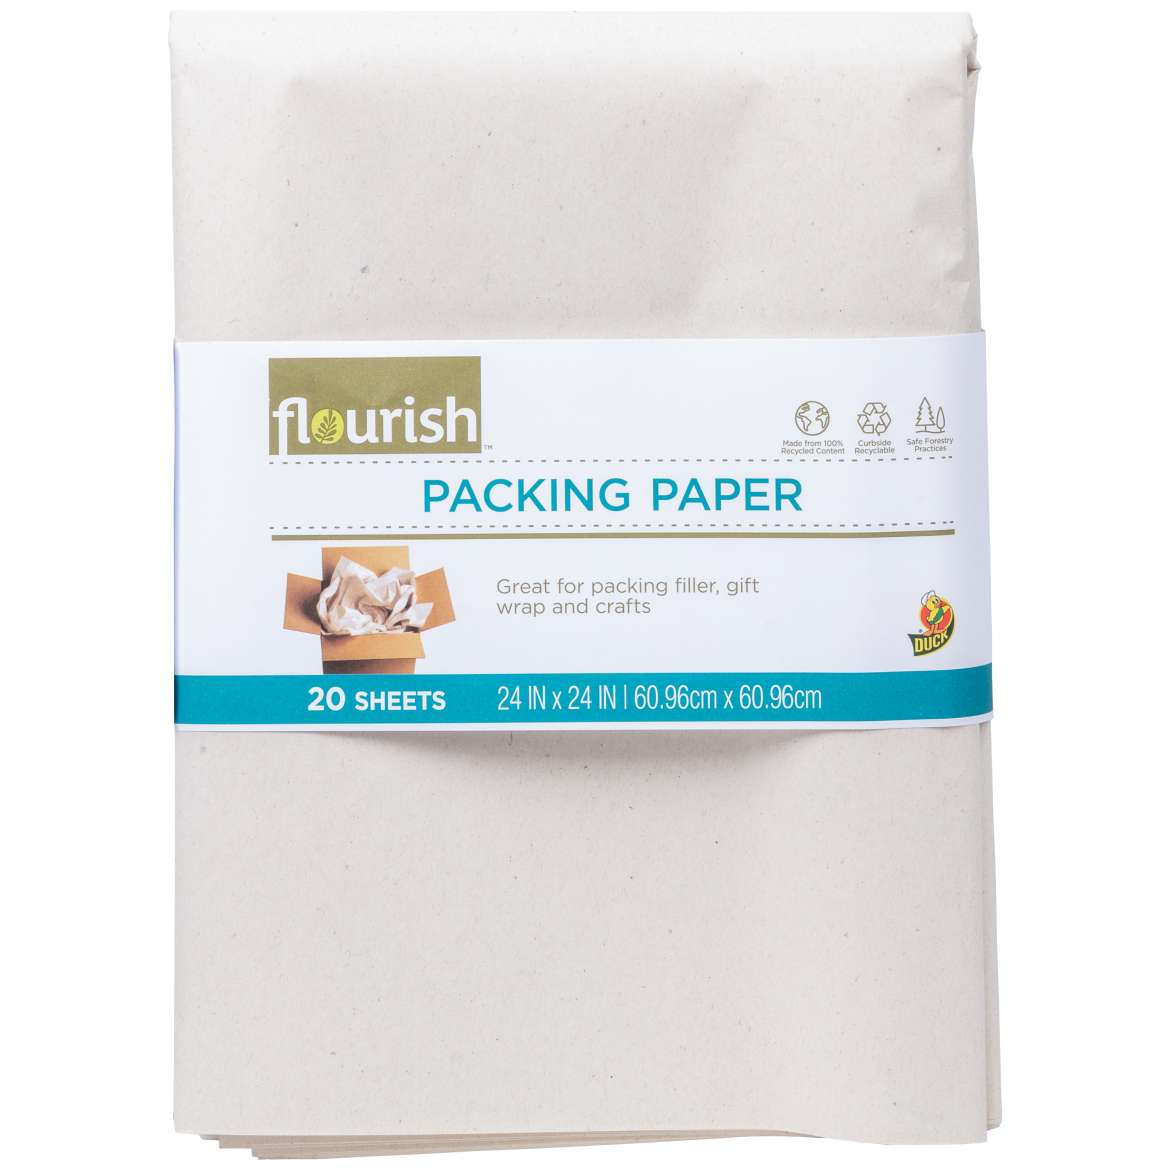 Duck Brand FPP Flourish Recycled Packing Paper